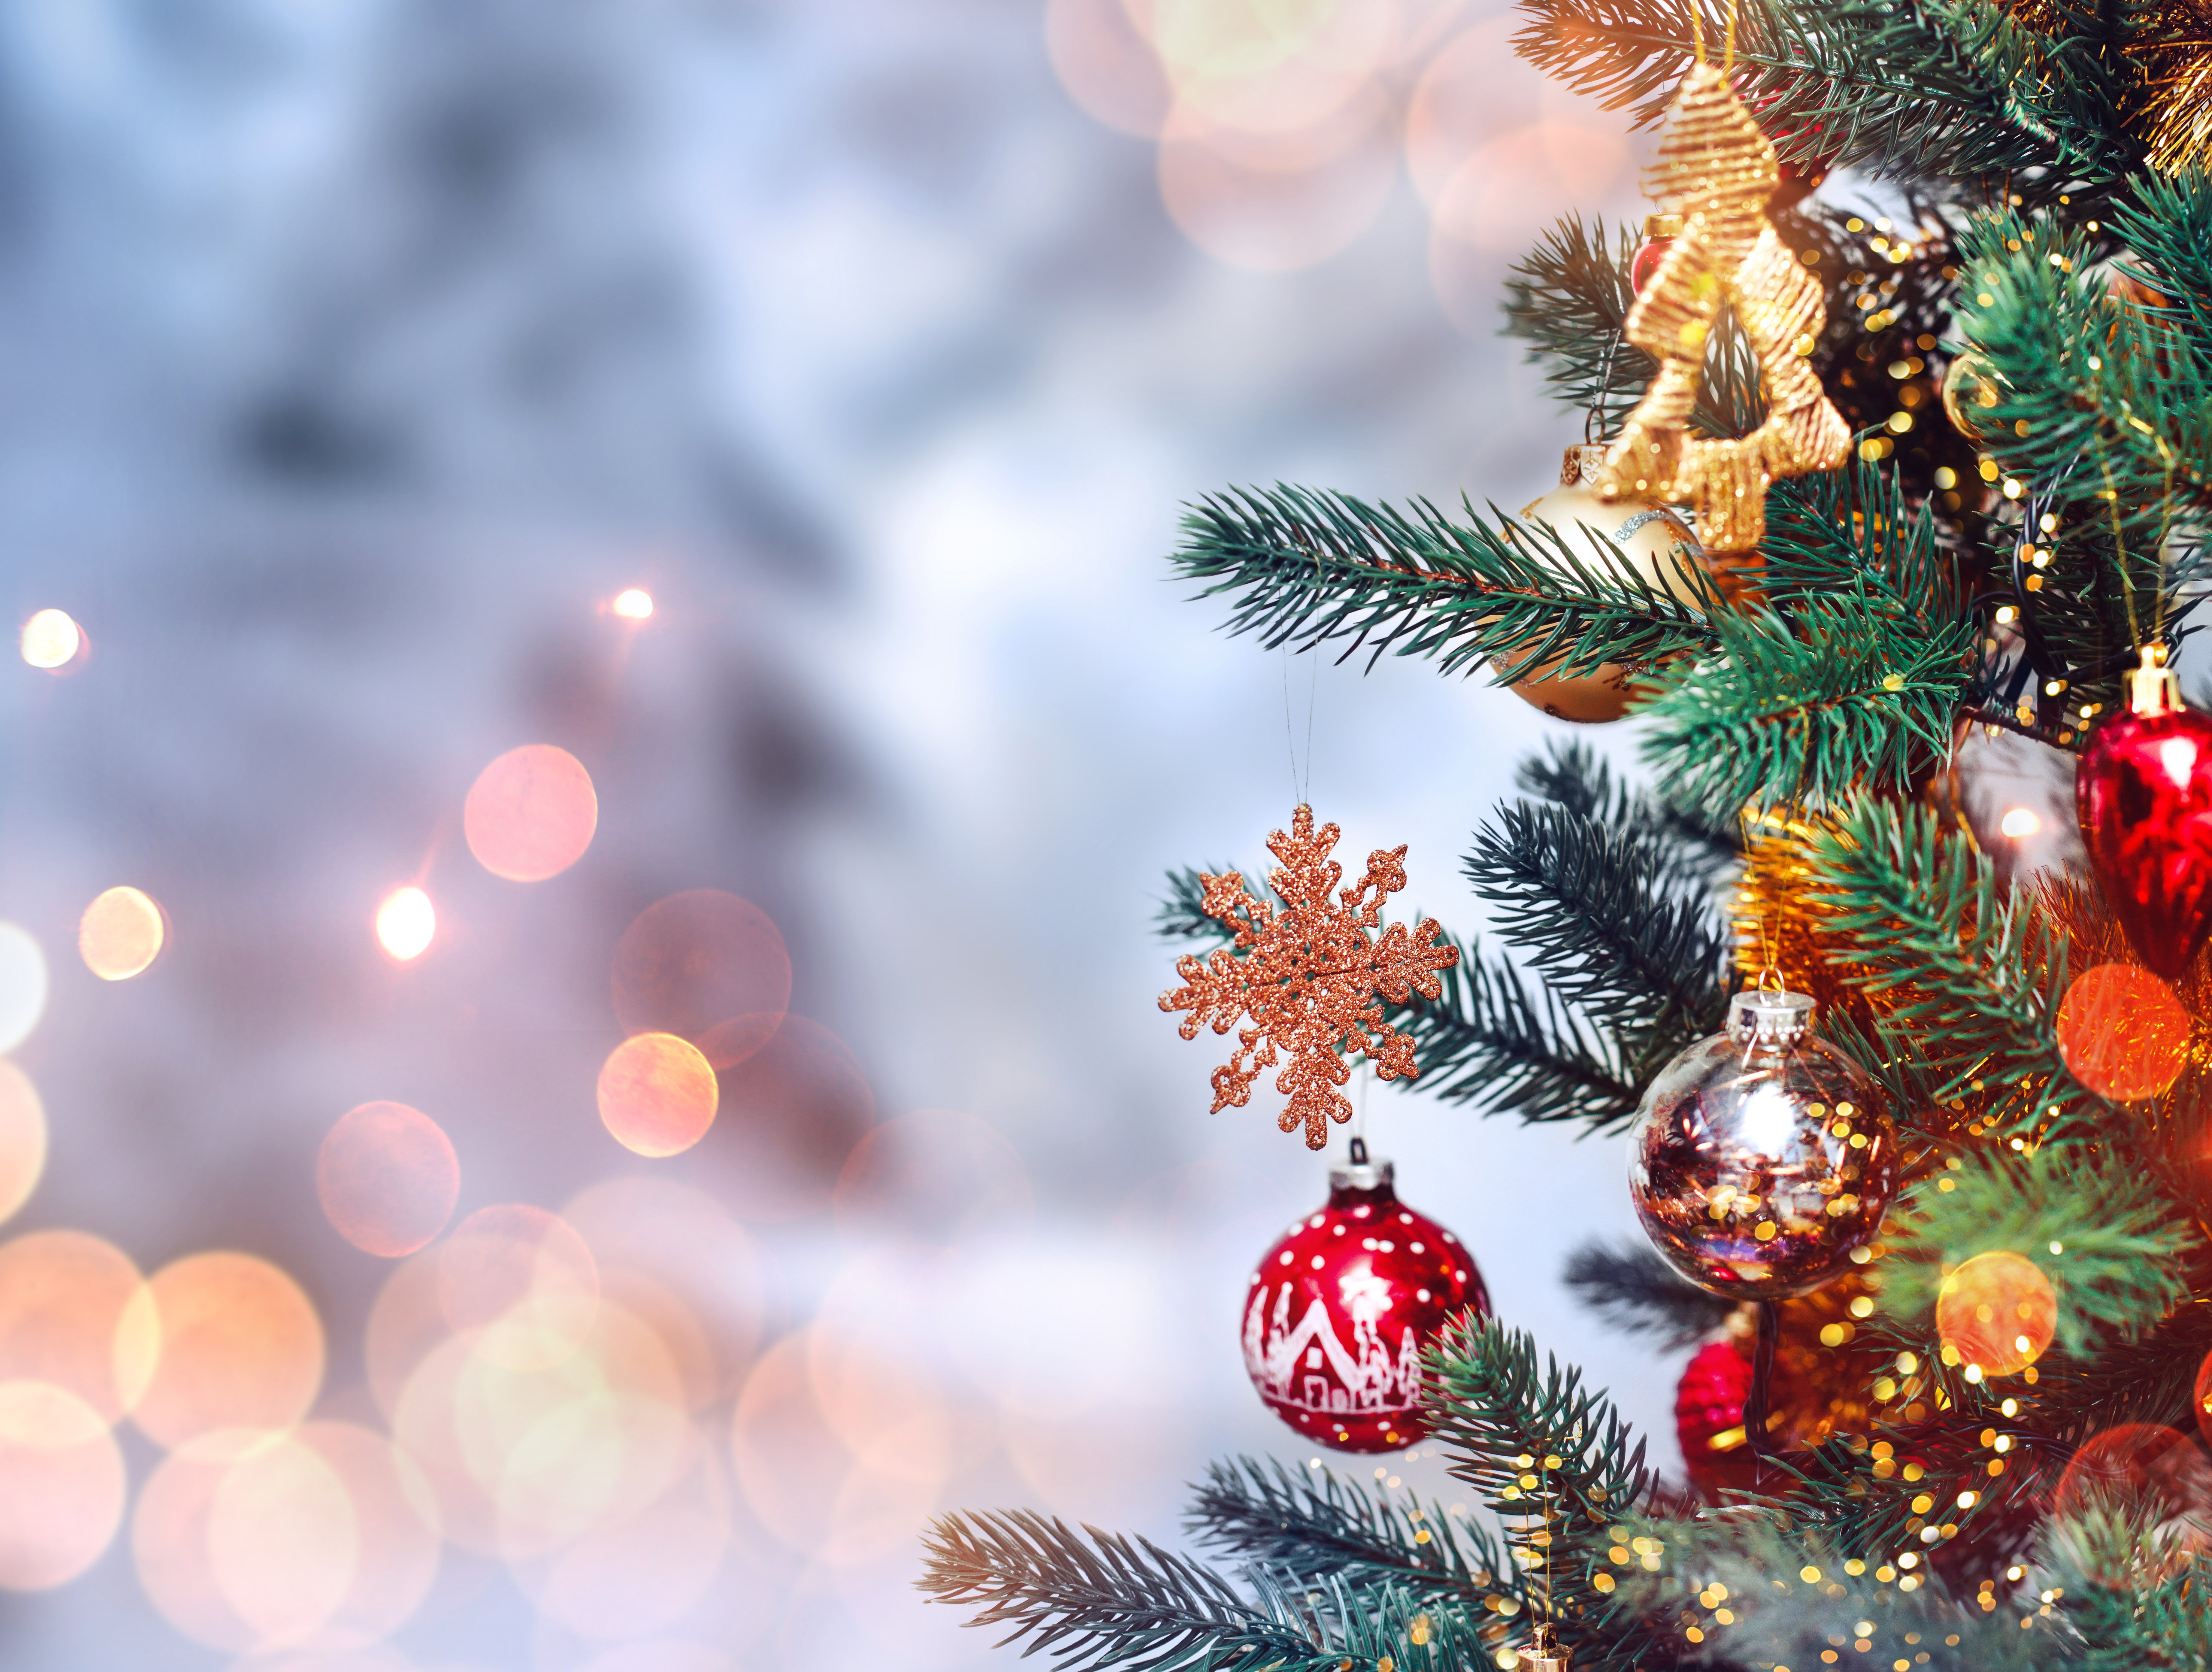 Christmas tree with lights | Photo: Shutterstock